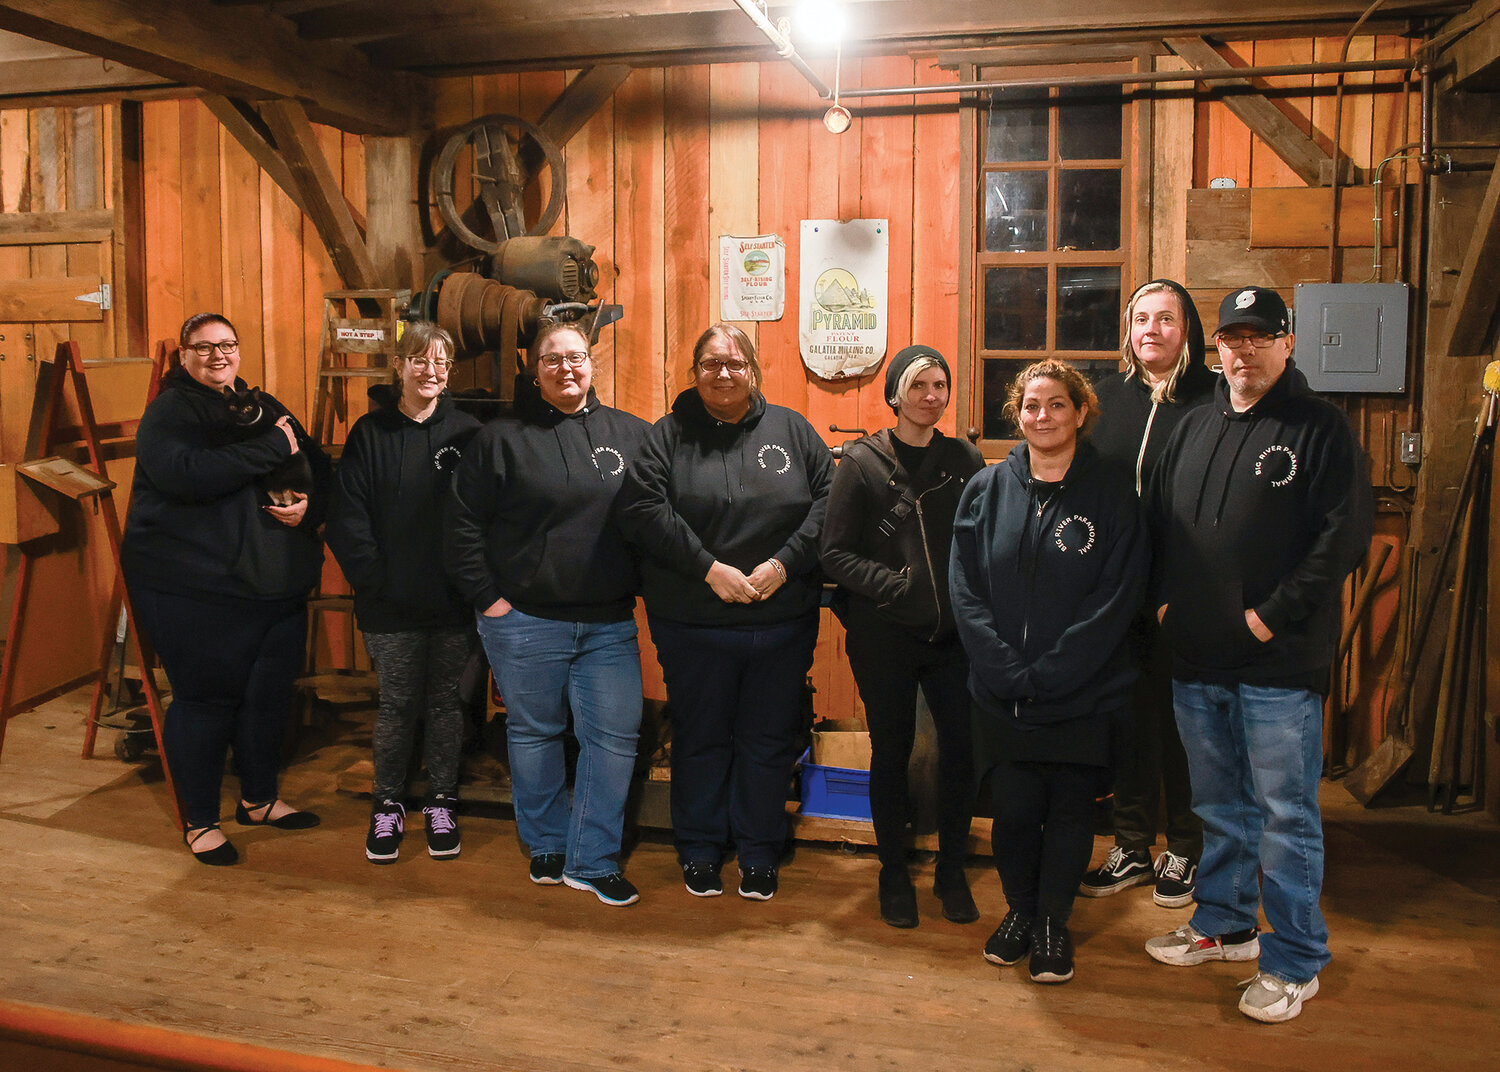 The Big River Paranormal team that investigated the Cedar Creek Grist Mill stands together after the investigation from the night of Saturday, Oct. 14 to the early morning of Sunday, Oct. 15. From left to right, Mariah Taasevigen, Kasey Breuier, Erin Nielsen, Barbara Flock, Rina James, Stacy       Rogers, Sommer Carter, Jason Hassler.